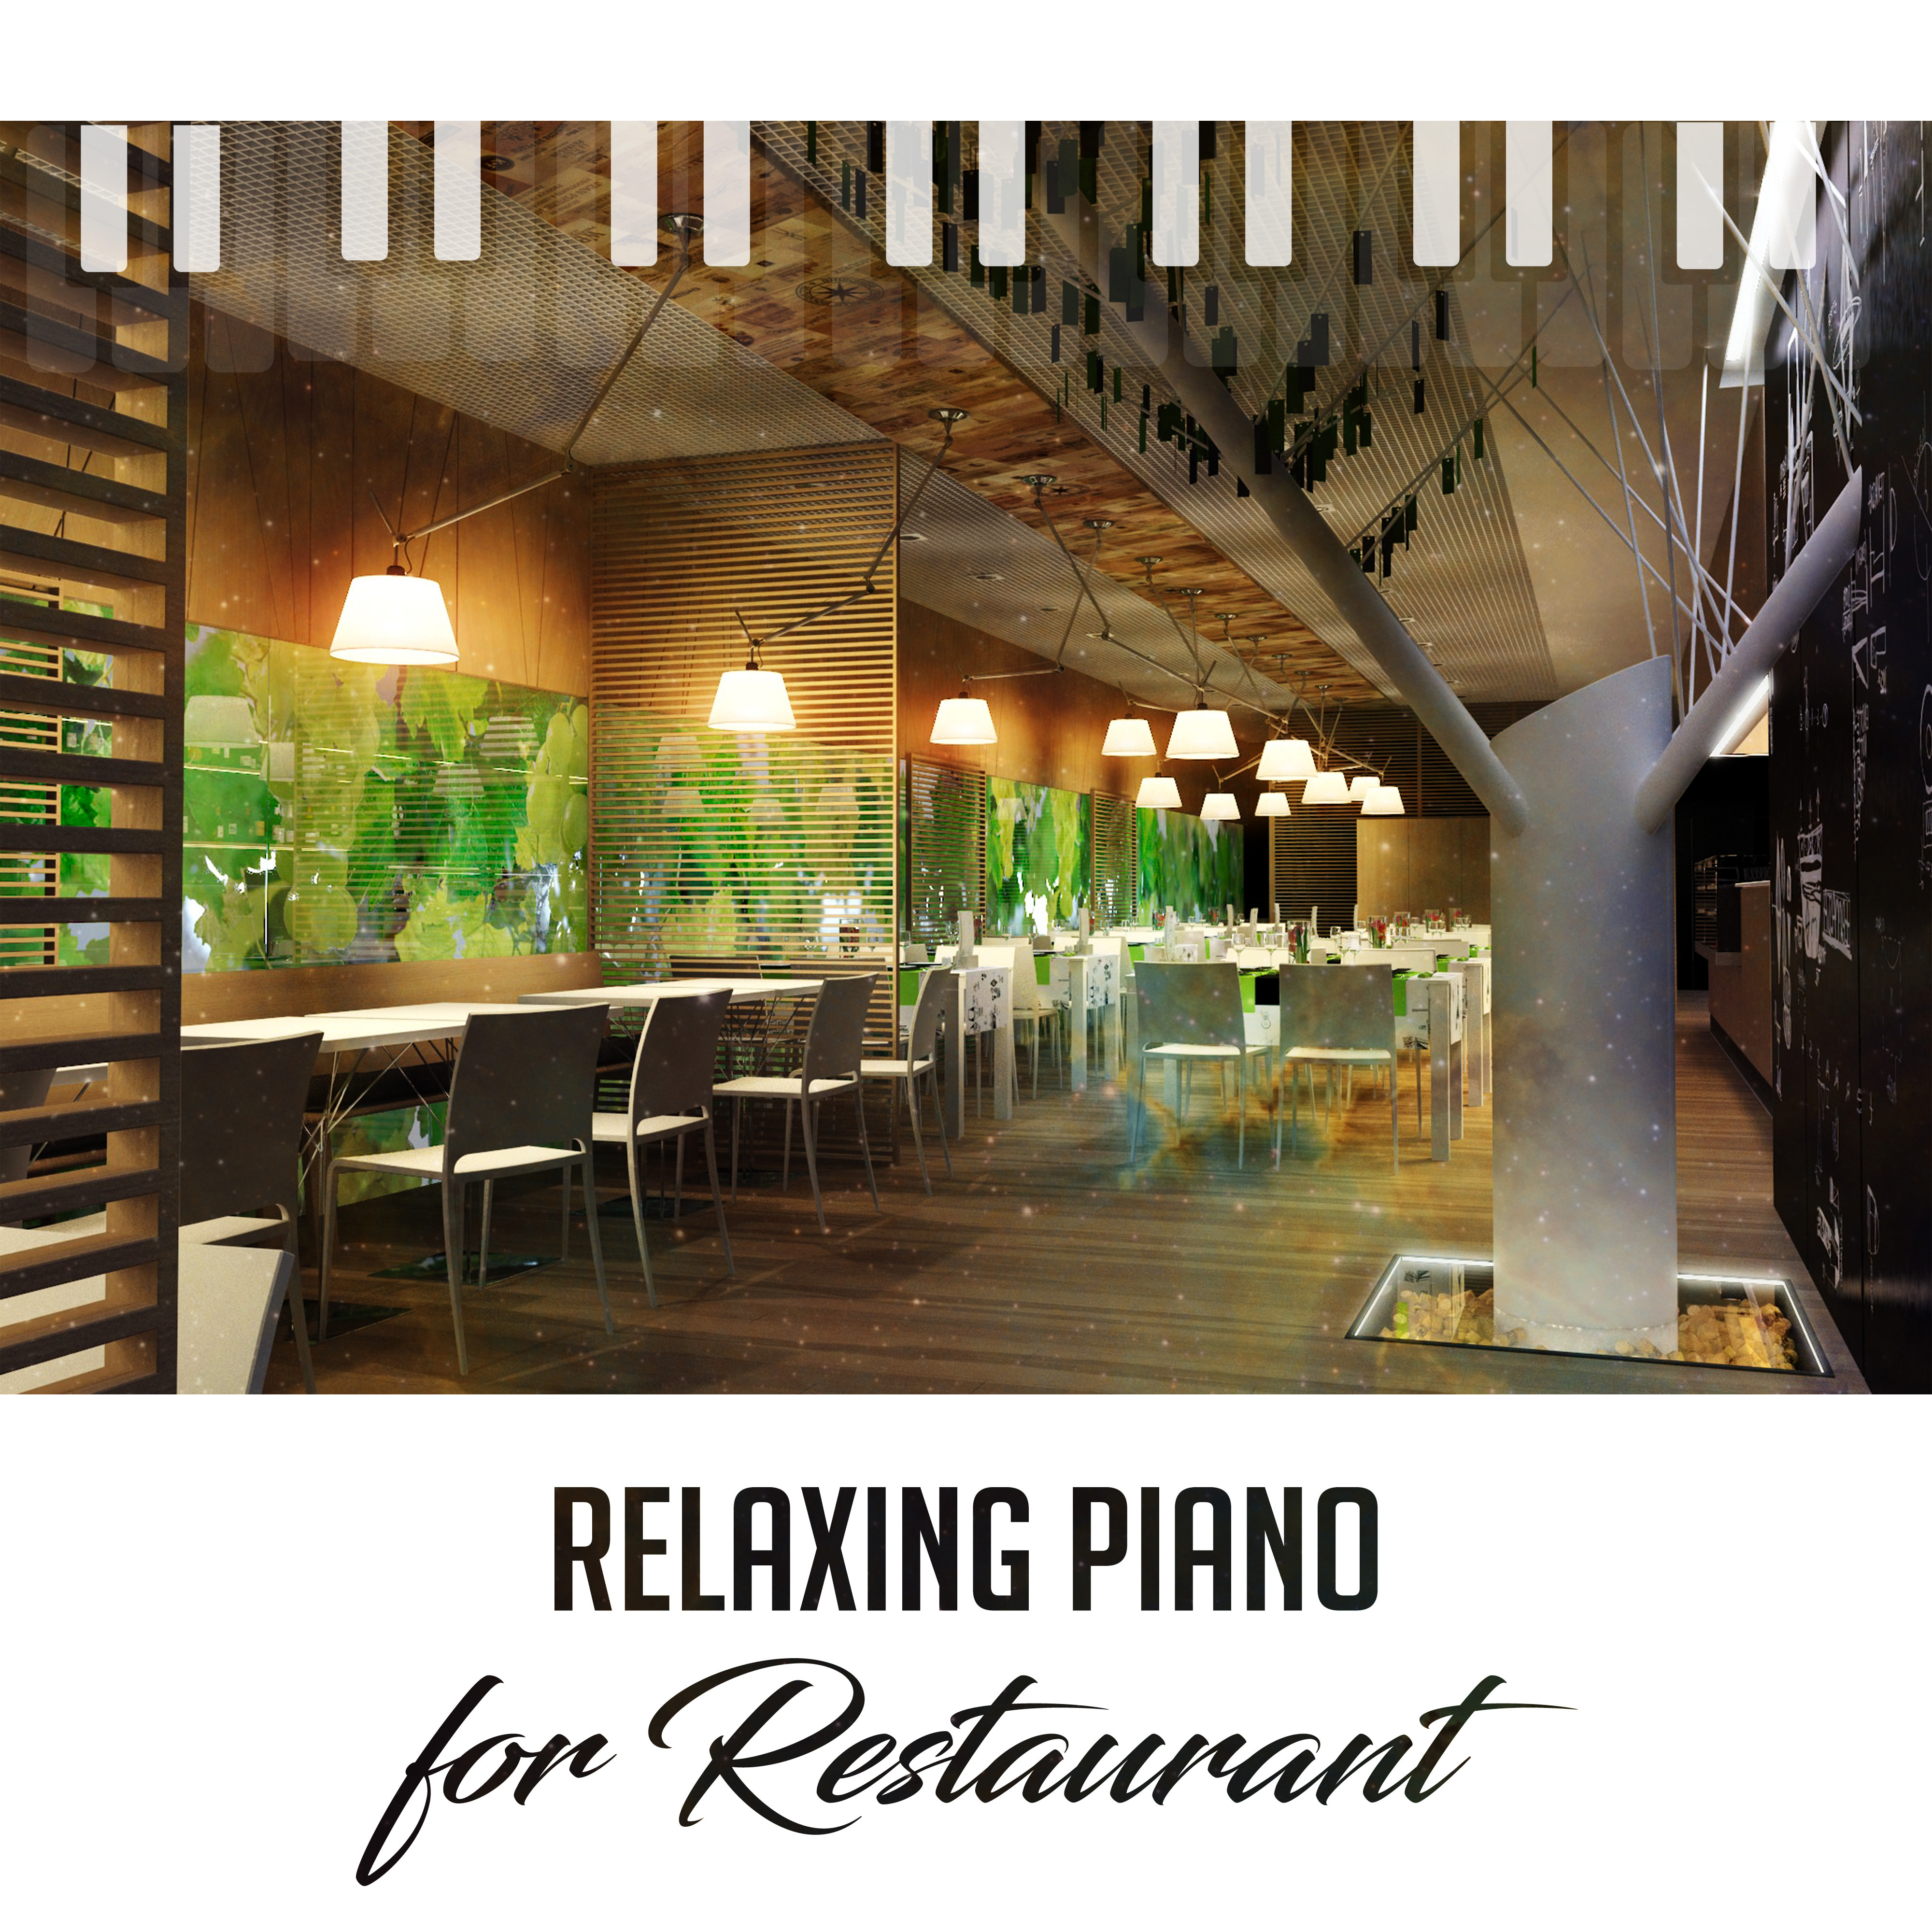 Relaxing Piano for Restaurant – Coffee Talk, Chilled Jazz, Dinner with Friends, Smooth Jazz for Relaxation, Instrumental Sounds, Peaceful Jazz, Gentle Piano